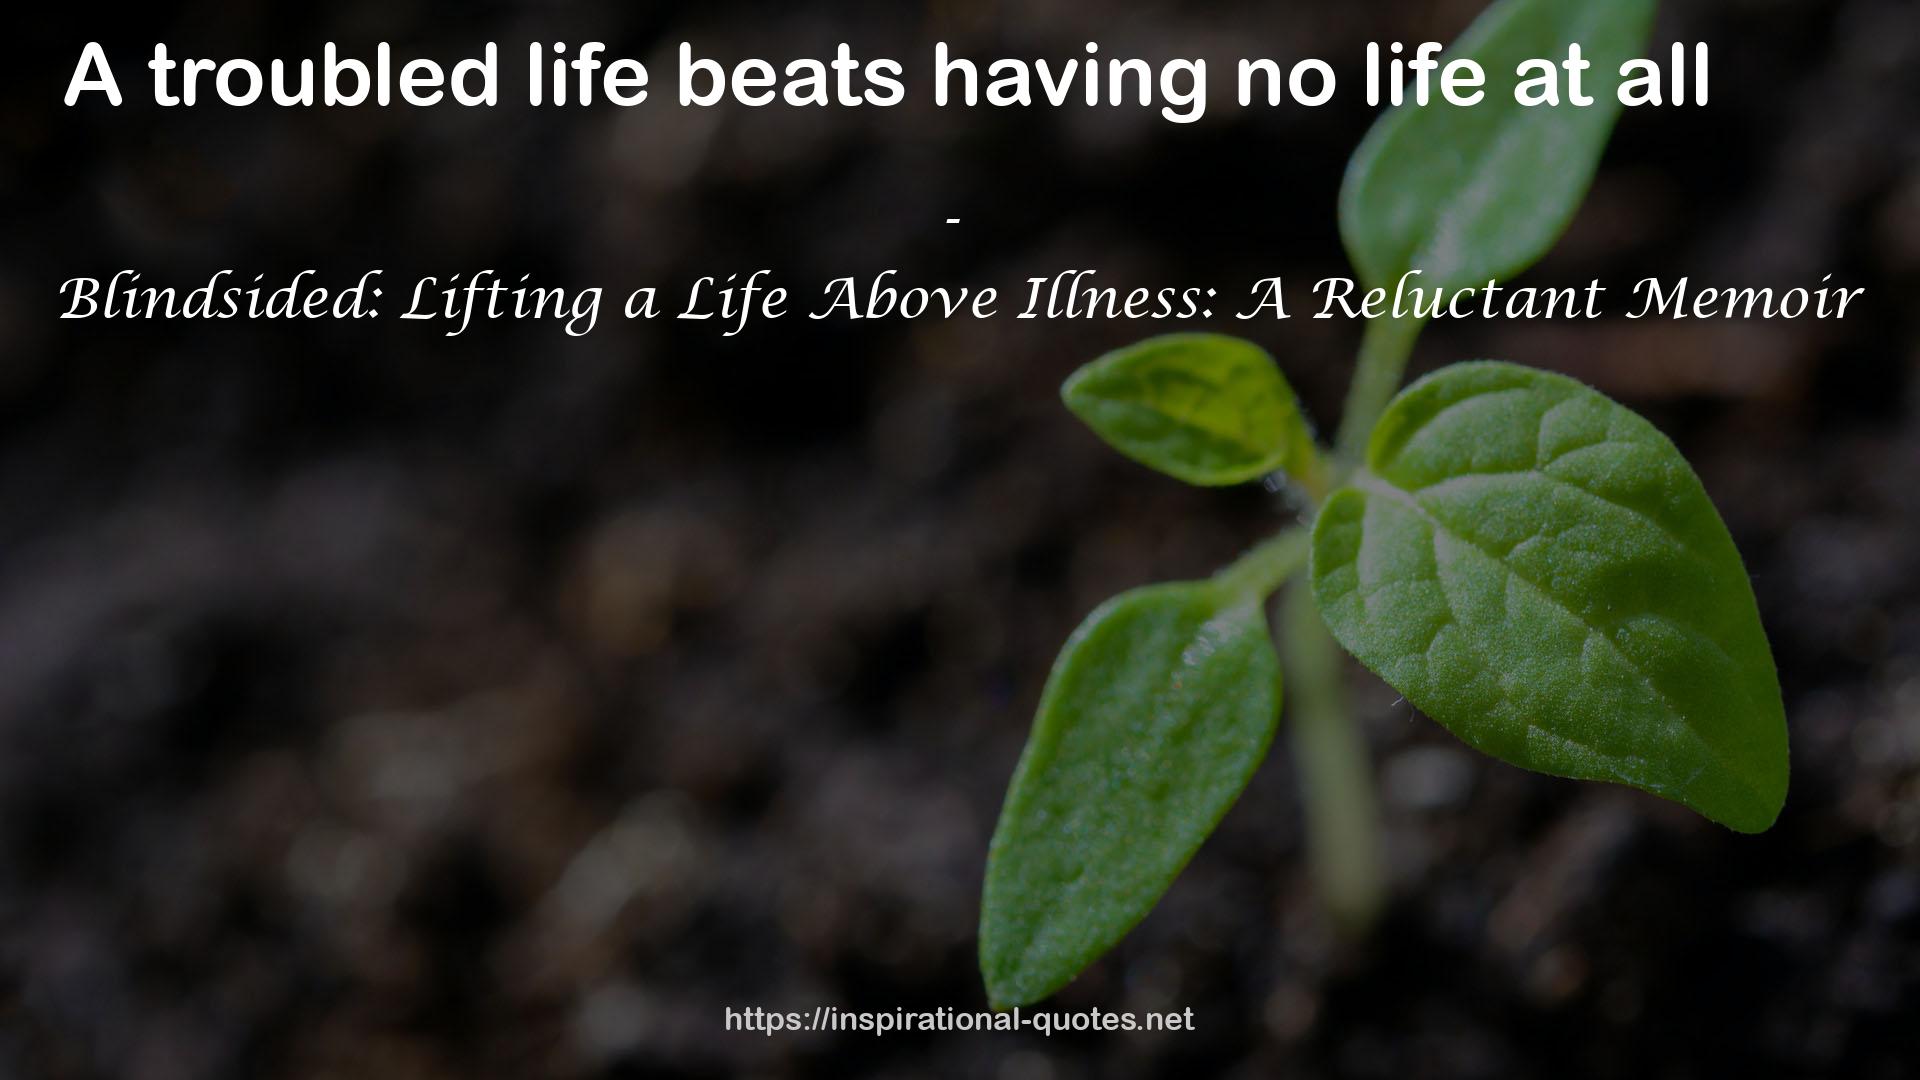 Blindsided: Lifting a Life Above Illness: A Reluctant Memoir QUOTES